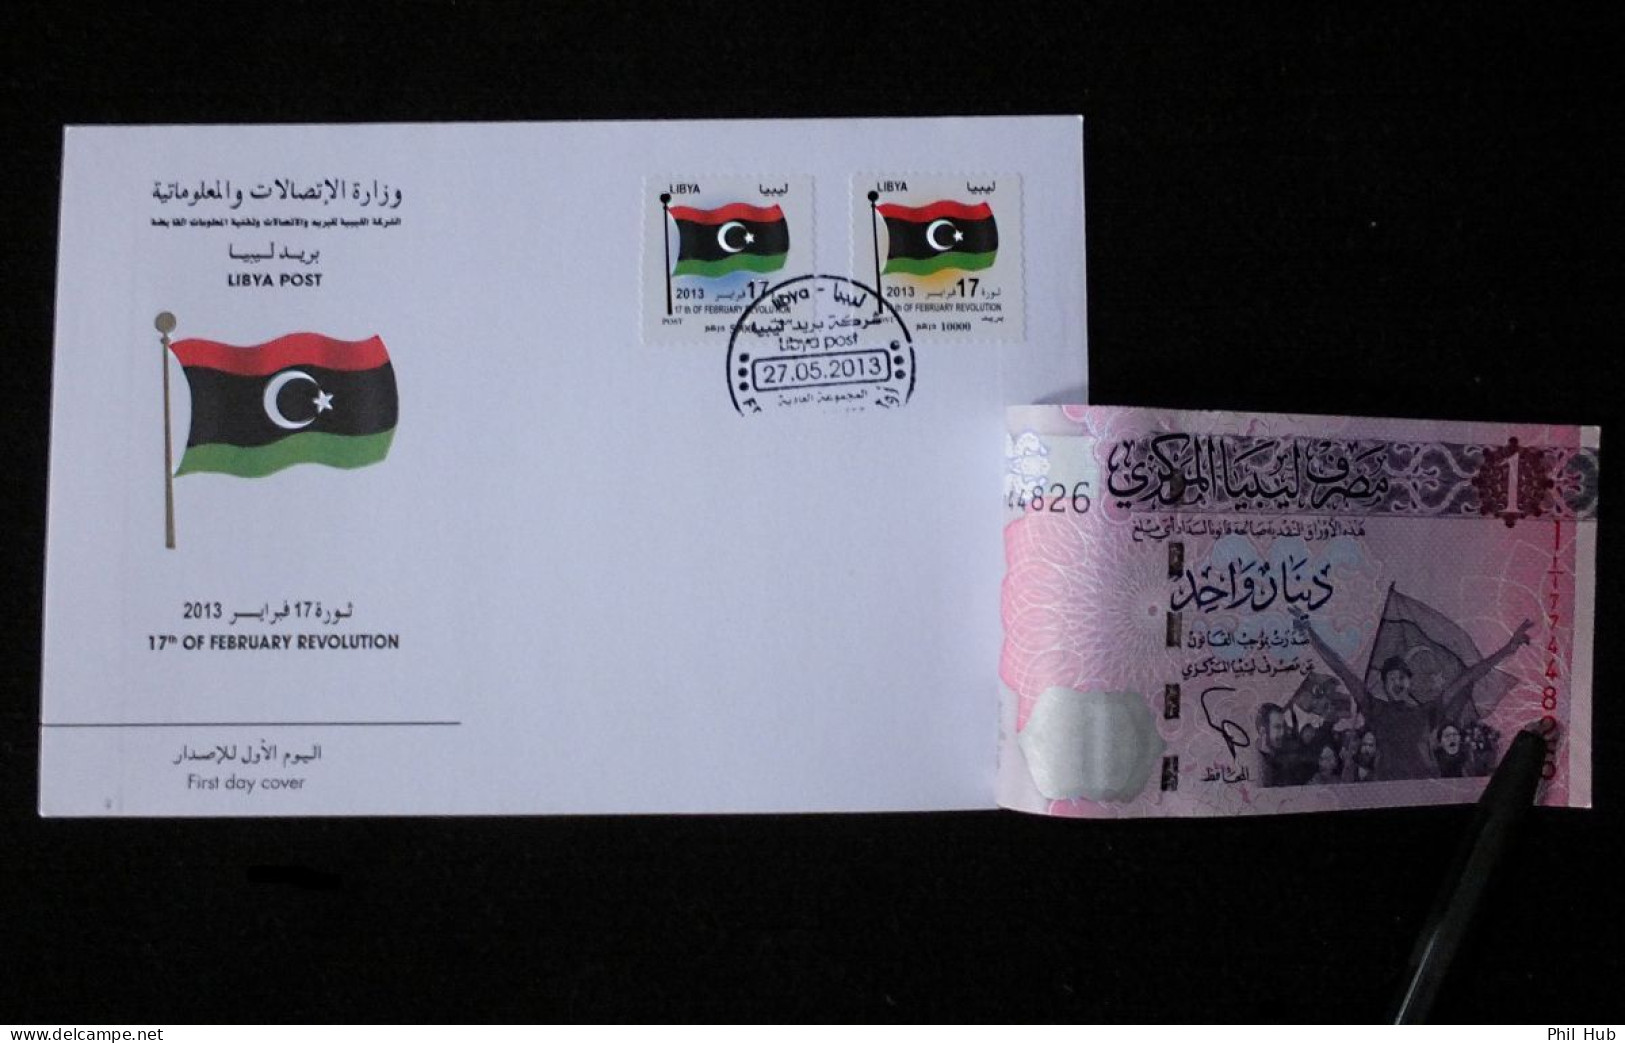 LIBYA 2013 "The Revolution FDC" NEW LIBYA FLAG STAMPS And BANKNOTE On FDC - Libyen